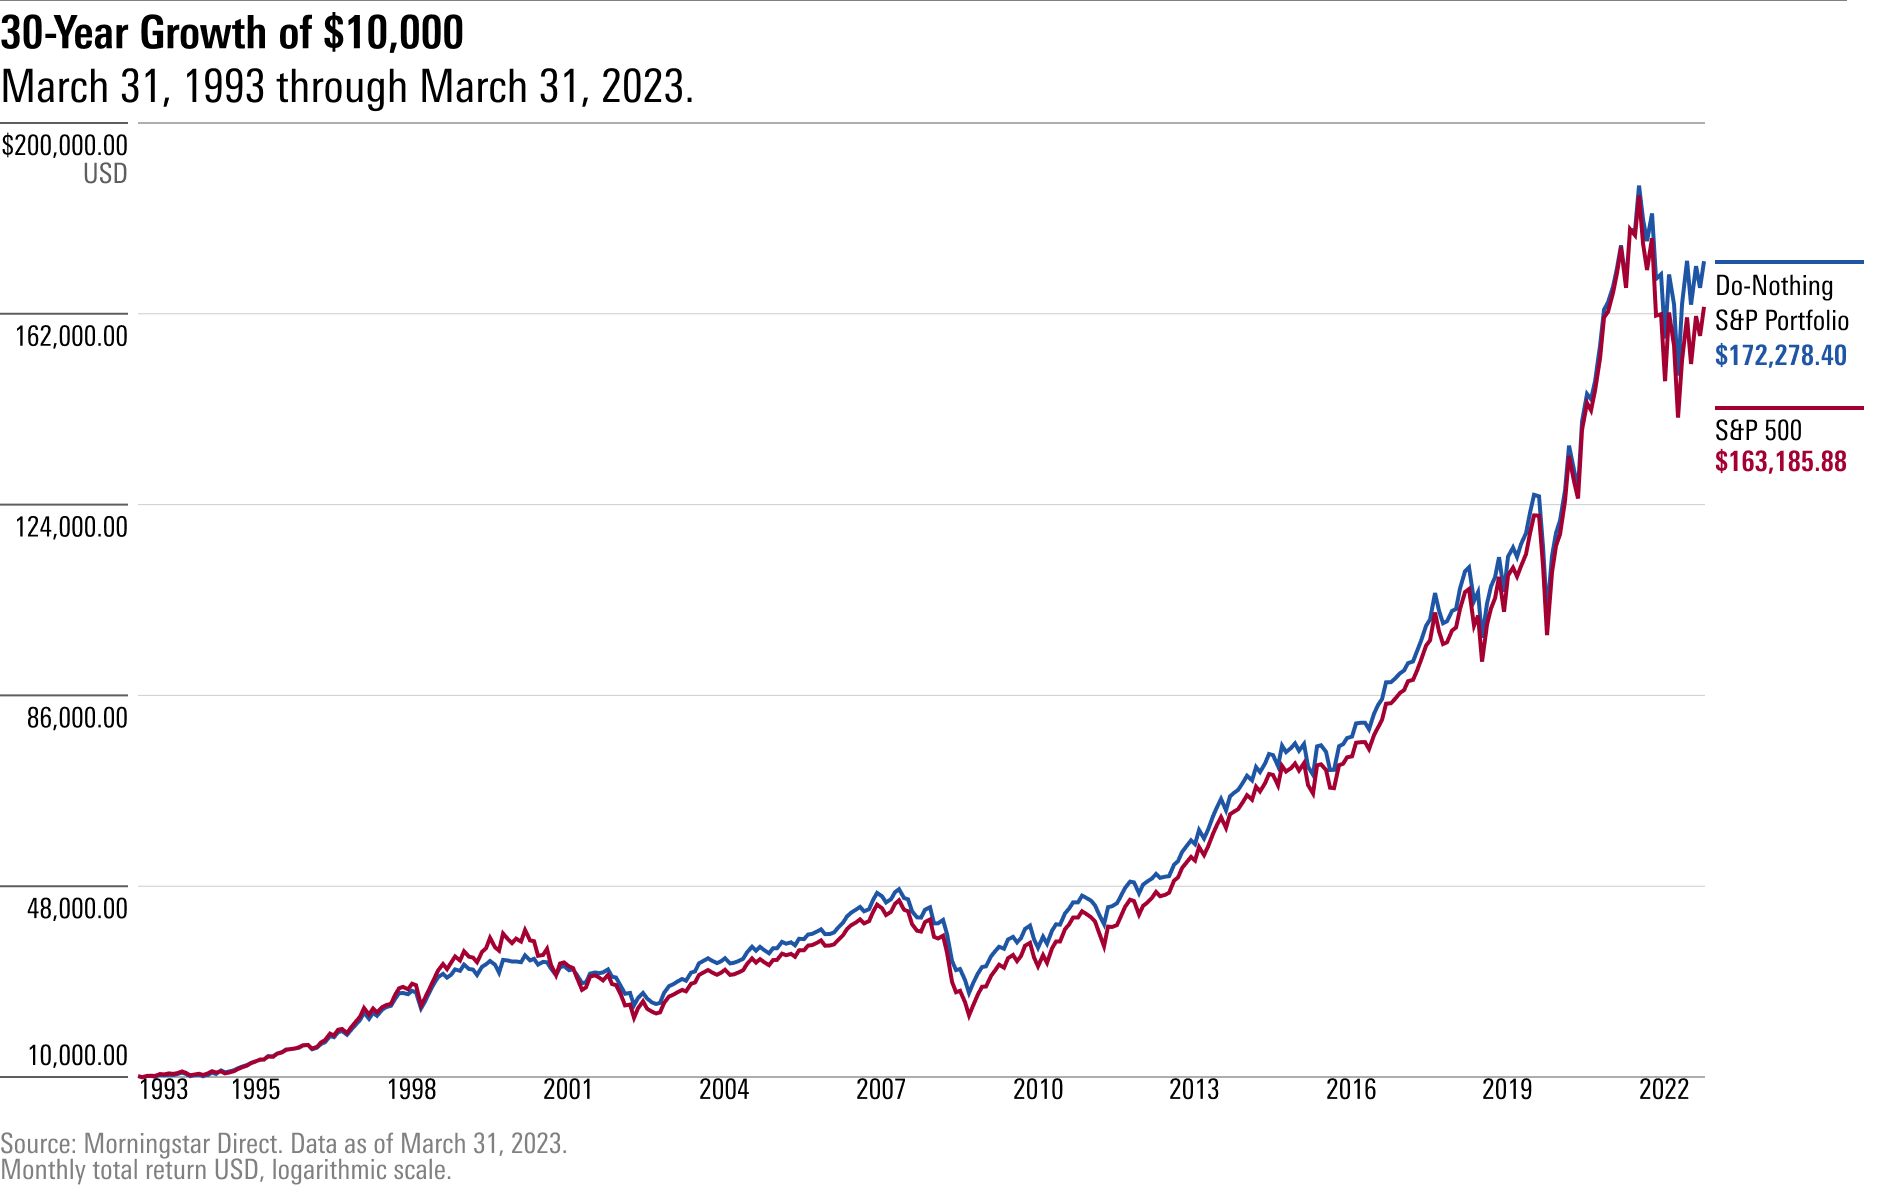 A growth of ten thousand dollars line chart comparing the cumulative return of the Do Nothing Portfolio with the S&P 500 over the 30 years ended March 31, 2023.